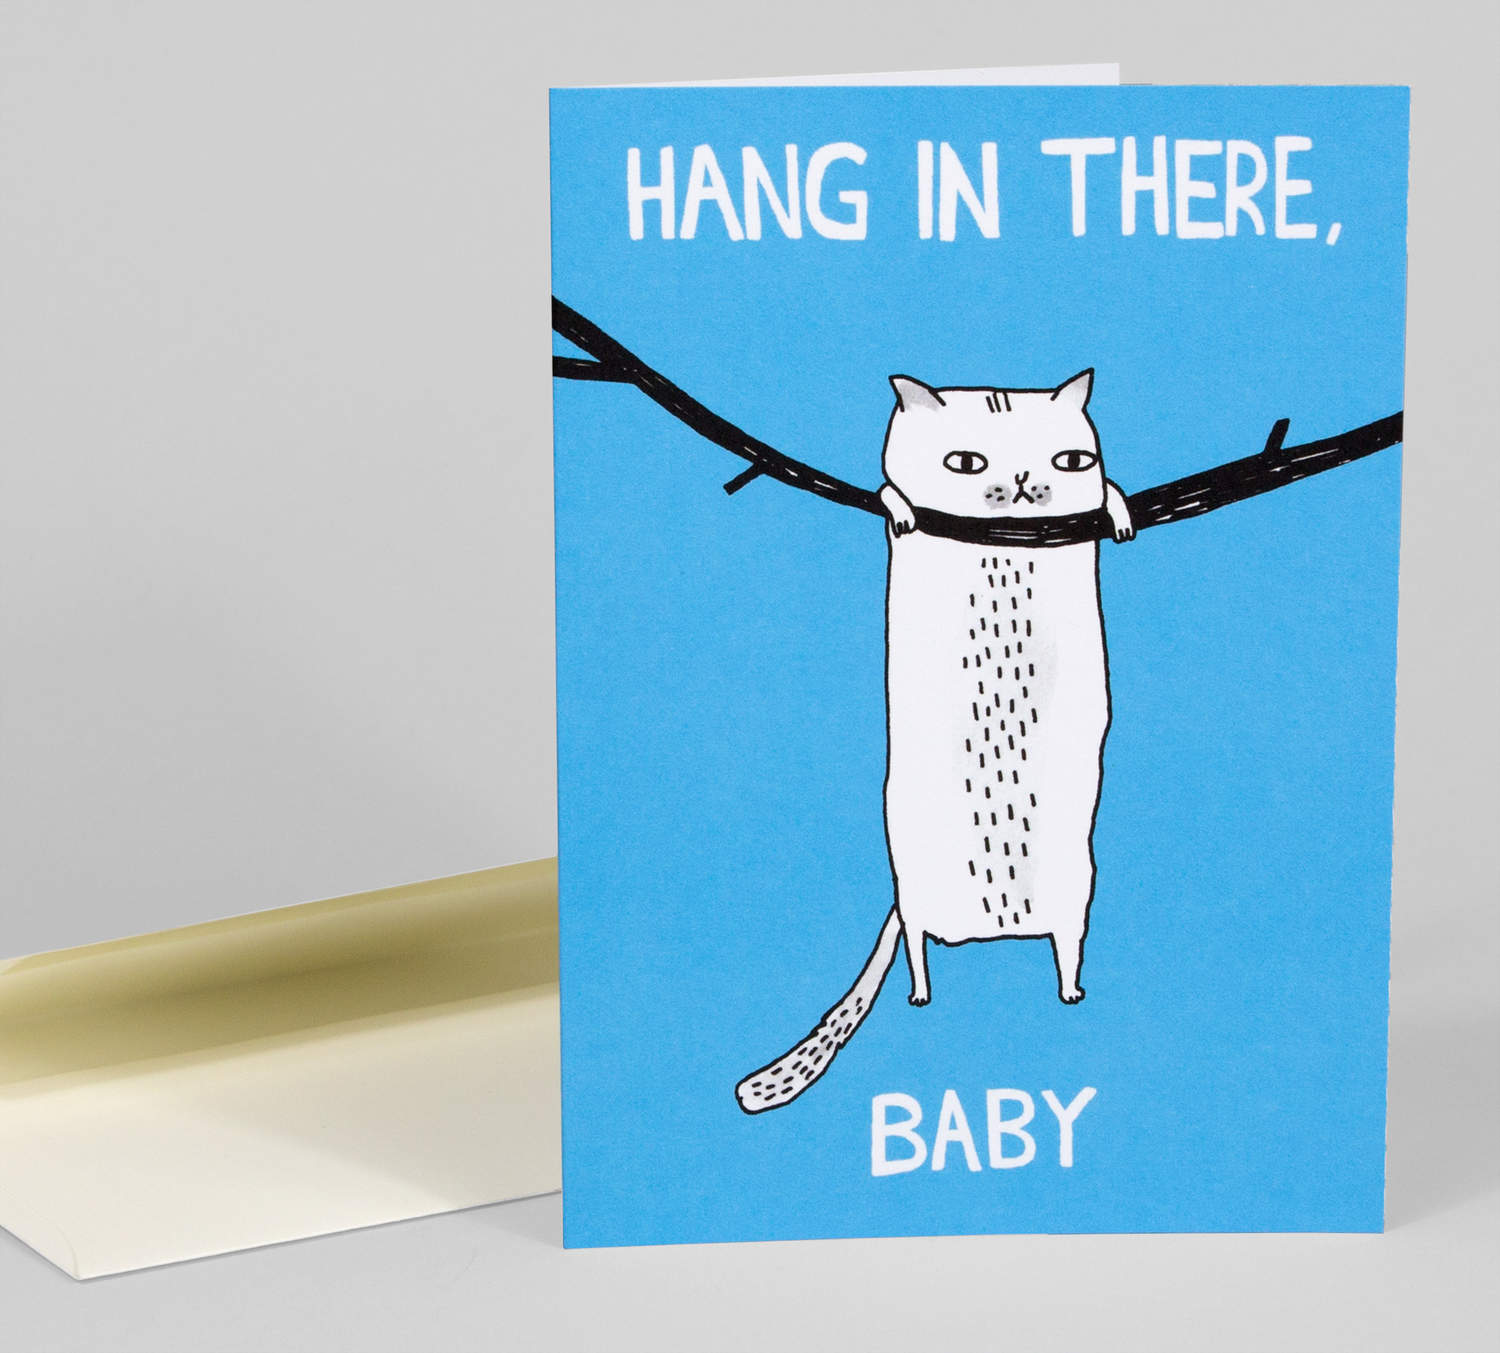 Gemma Correll - Hang in there, baby! at buyolympia.com